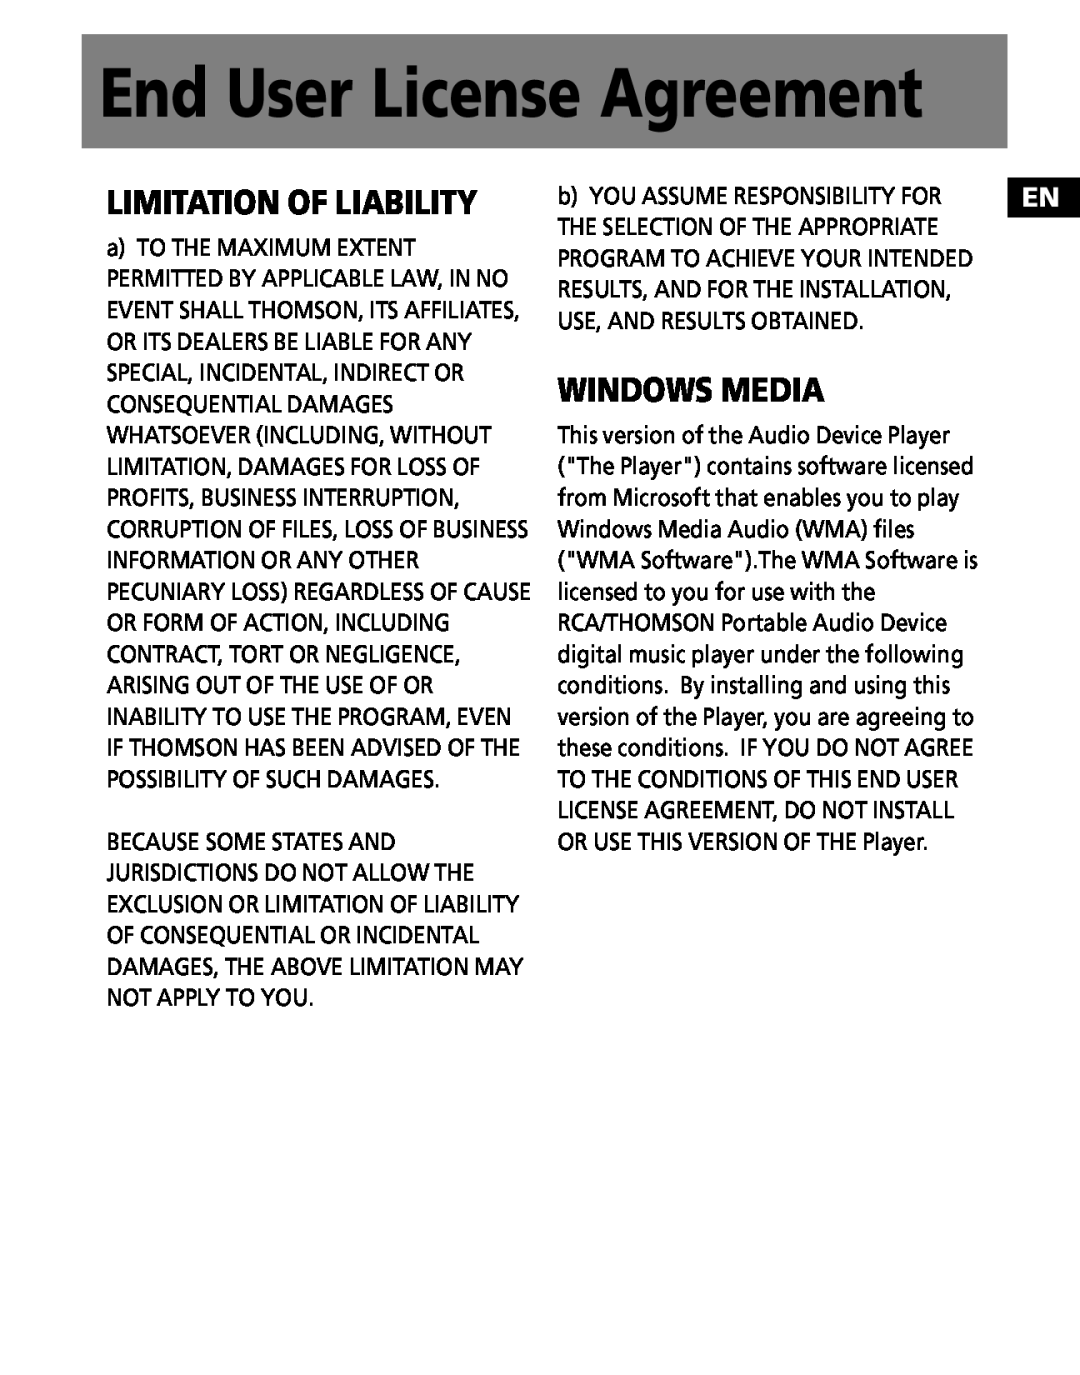 RCA M100256 user manual Limitation Of Liability, Windows Media, End User License Agreement, Use, And Results Obtained 